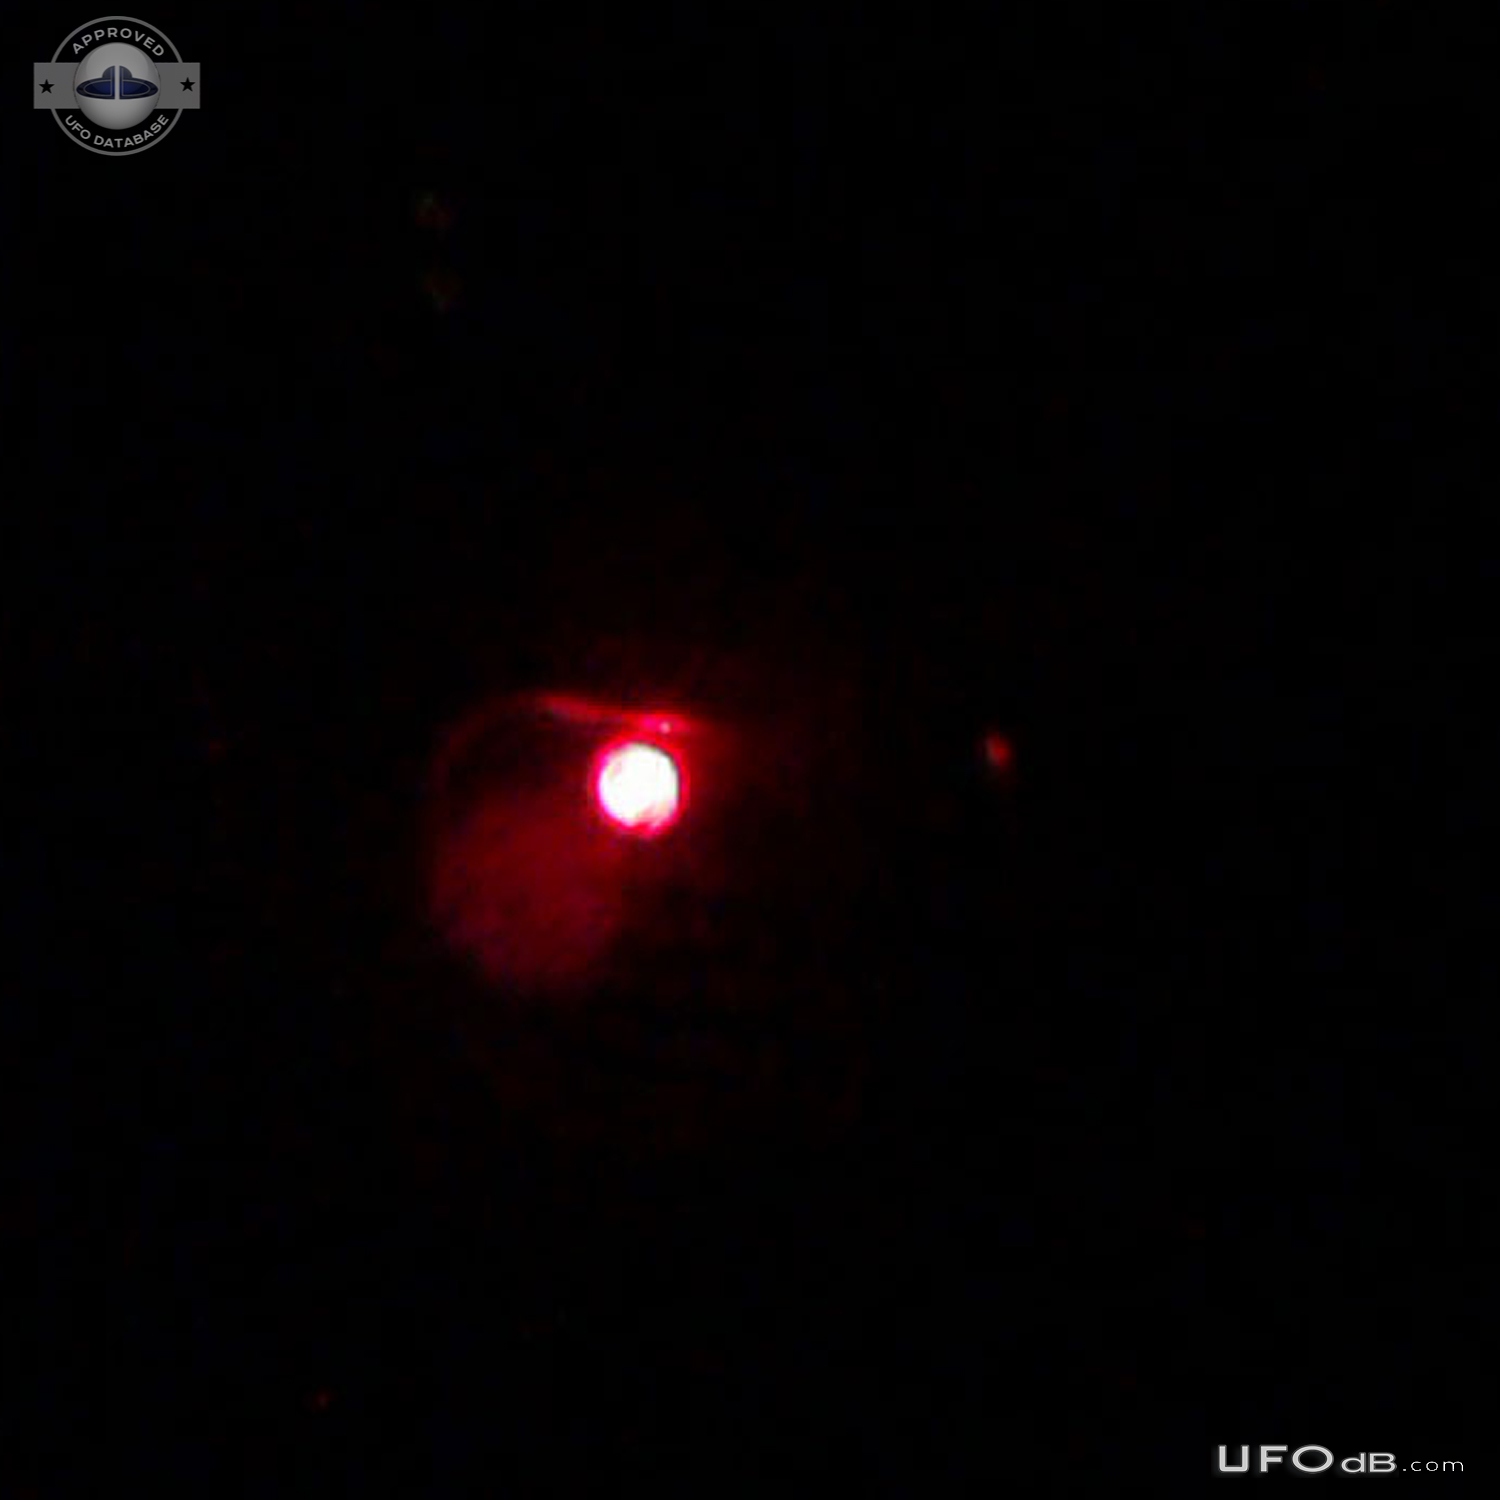 2 Red UFOs illuminating the Clouds - Toddington, Bedfordshire UK 2013 UFO Picture #653-2